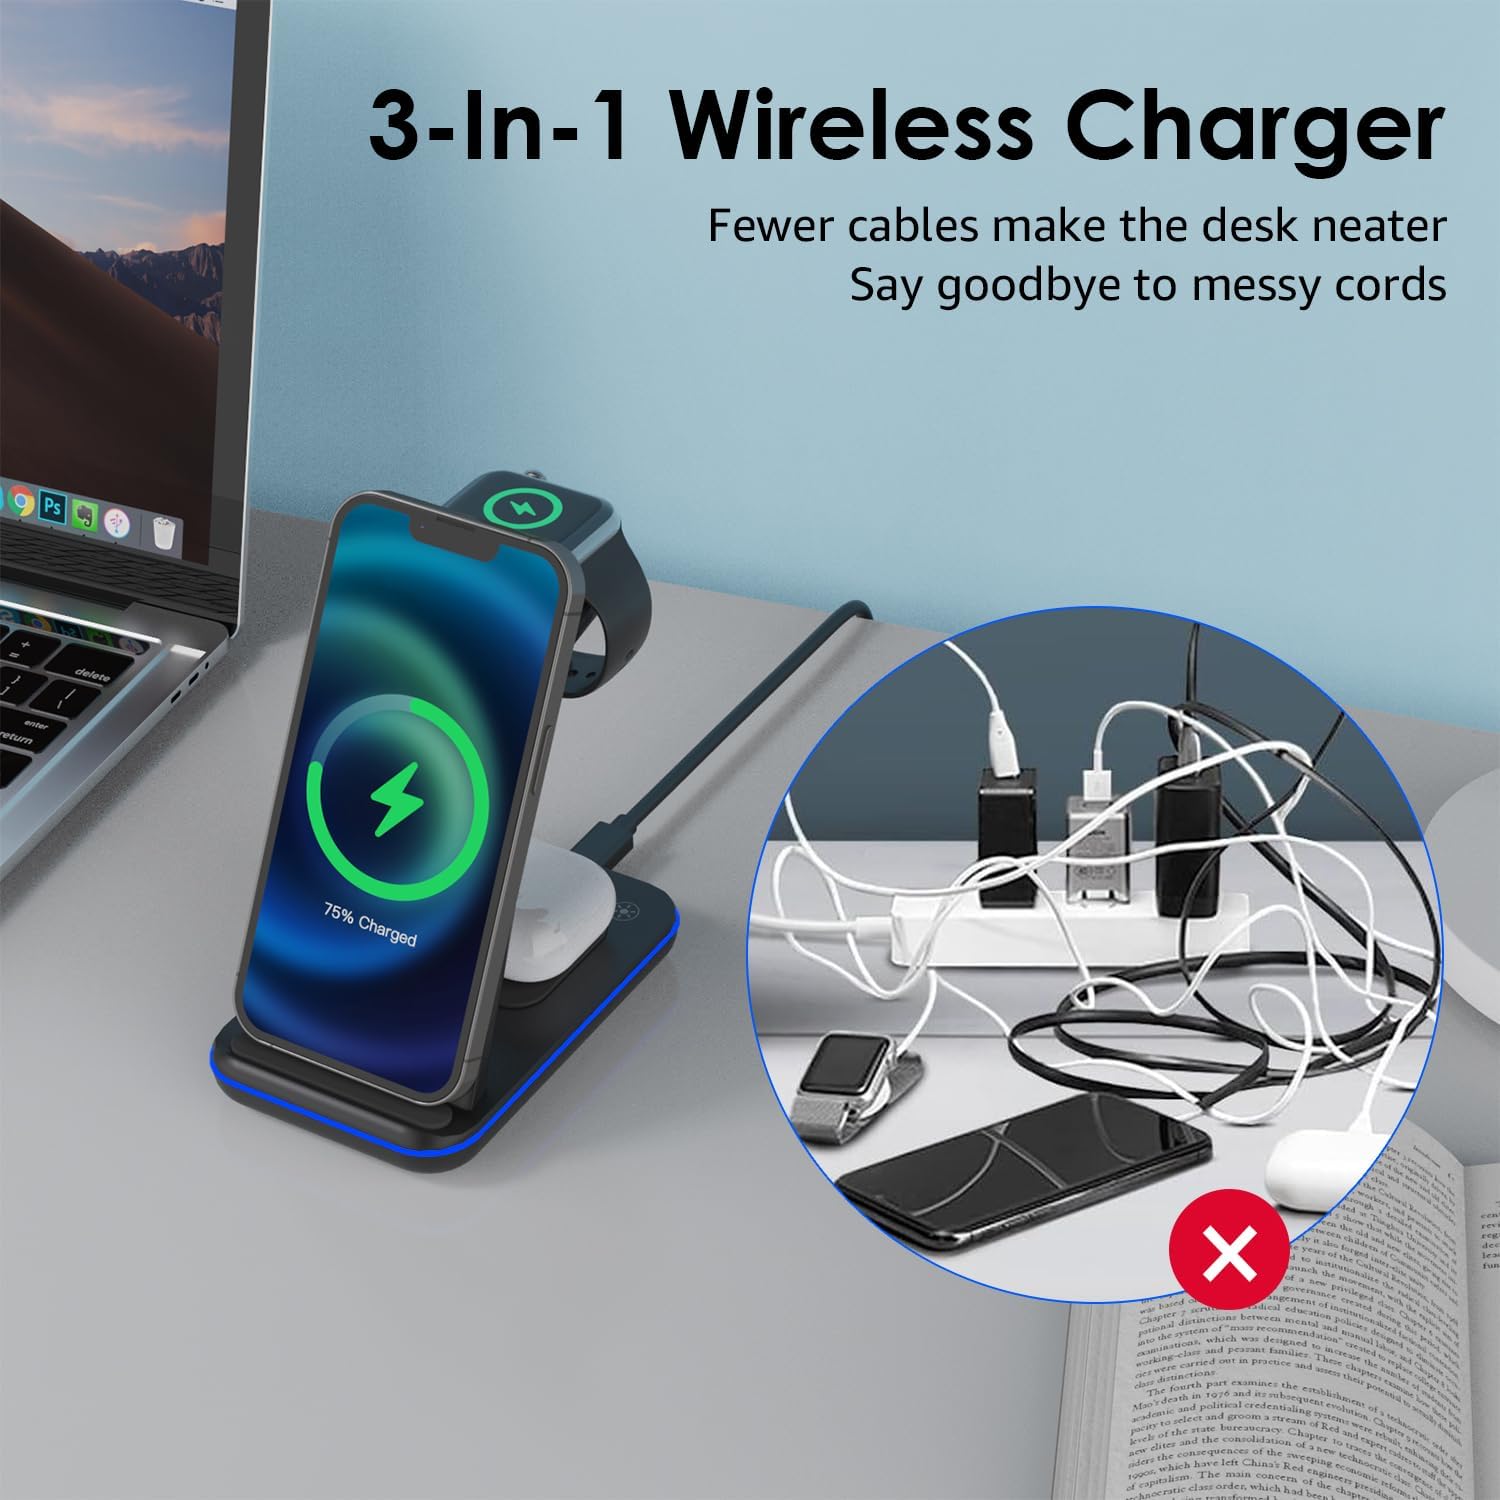 Minthouz Wireless Charger, 18W 3 in 1 Fast Wireless Charging Station for Multiple Devices Apple Watch, AirPods, Wireless Charger Stand Compatible with iPhone 14/13/12/11 Series, Samsung (with Adapter)